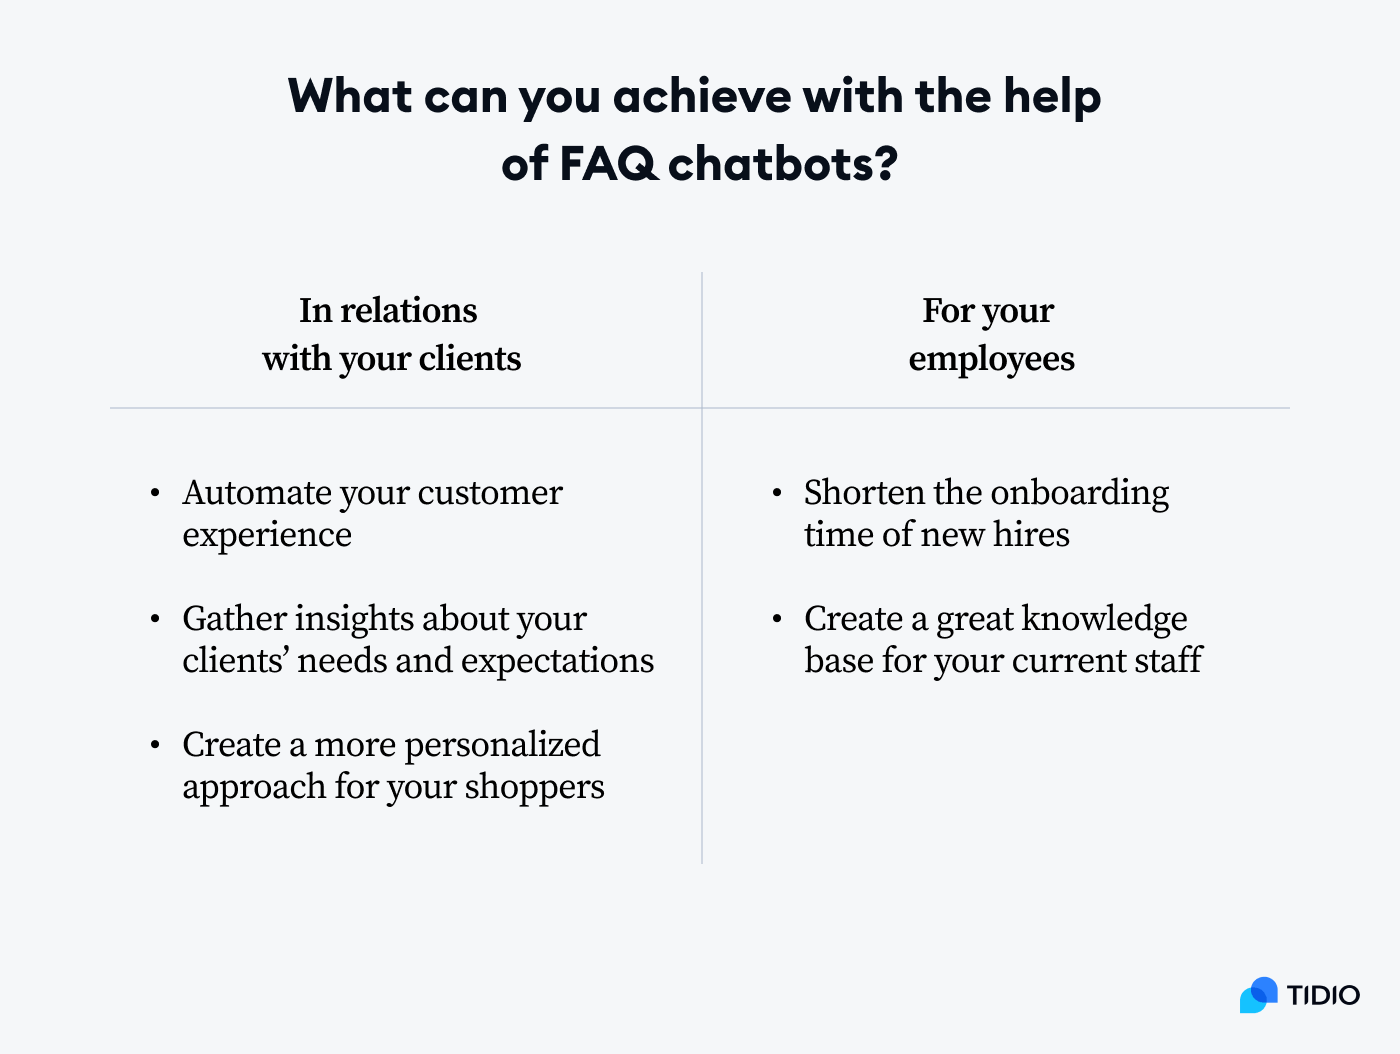 two use cases of FAQ bots—for your customers and employees 